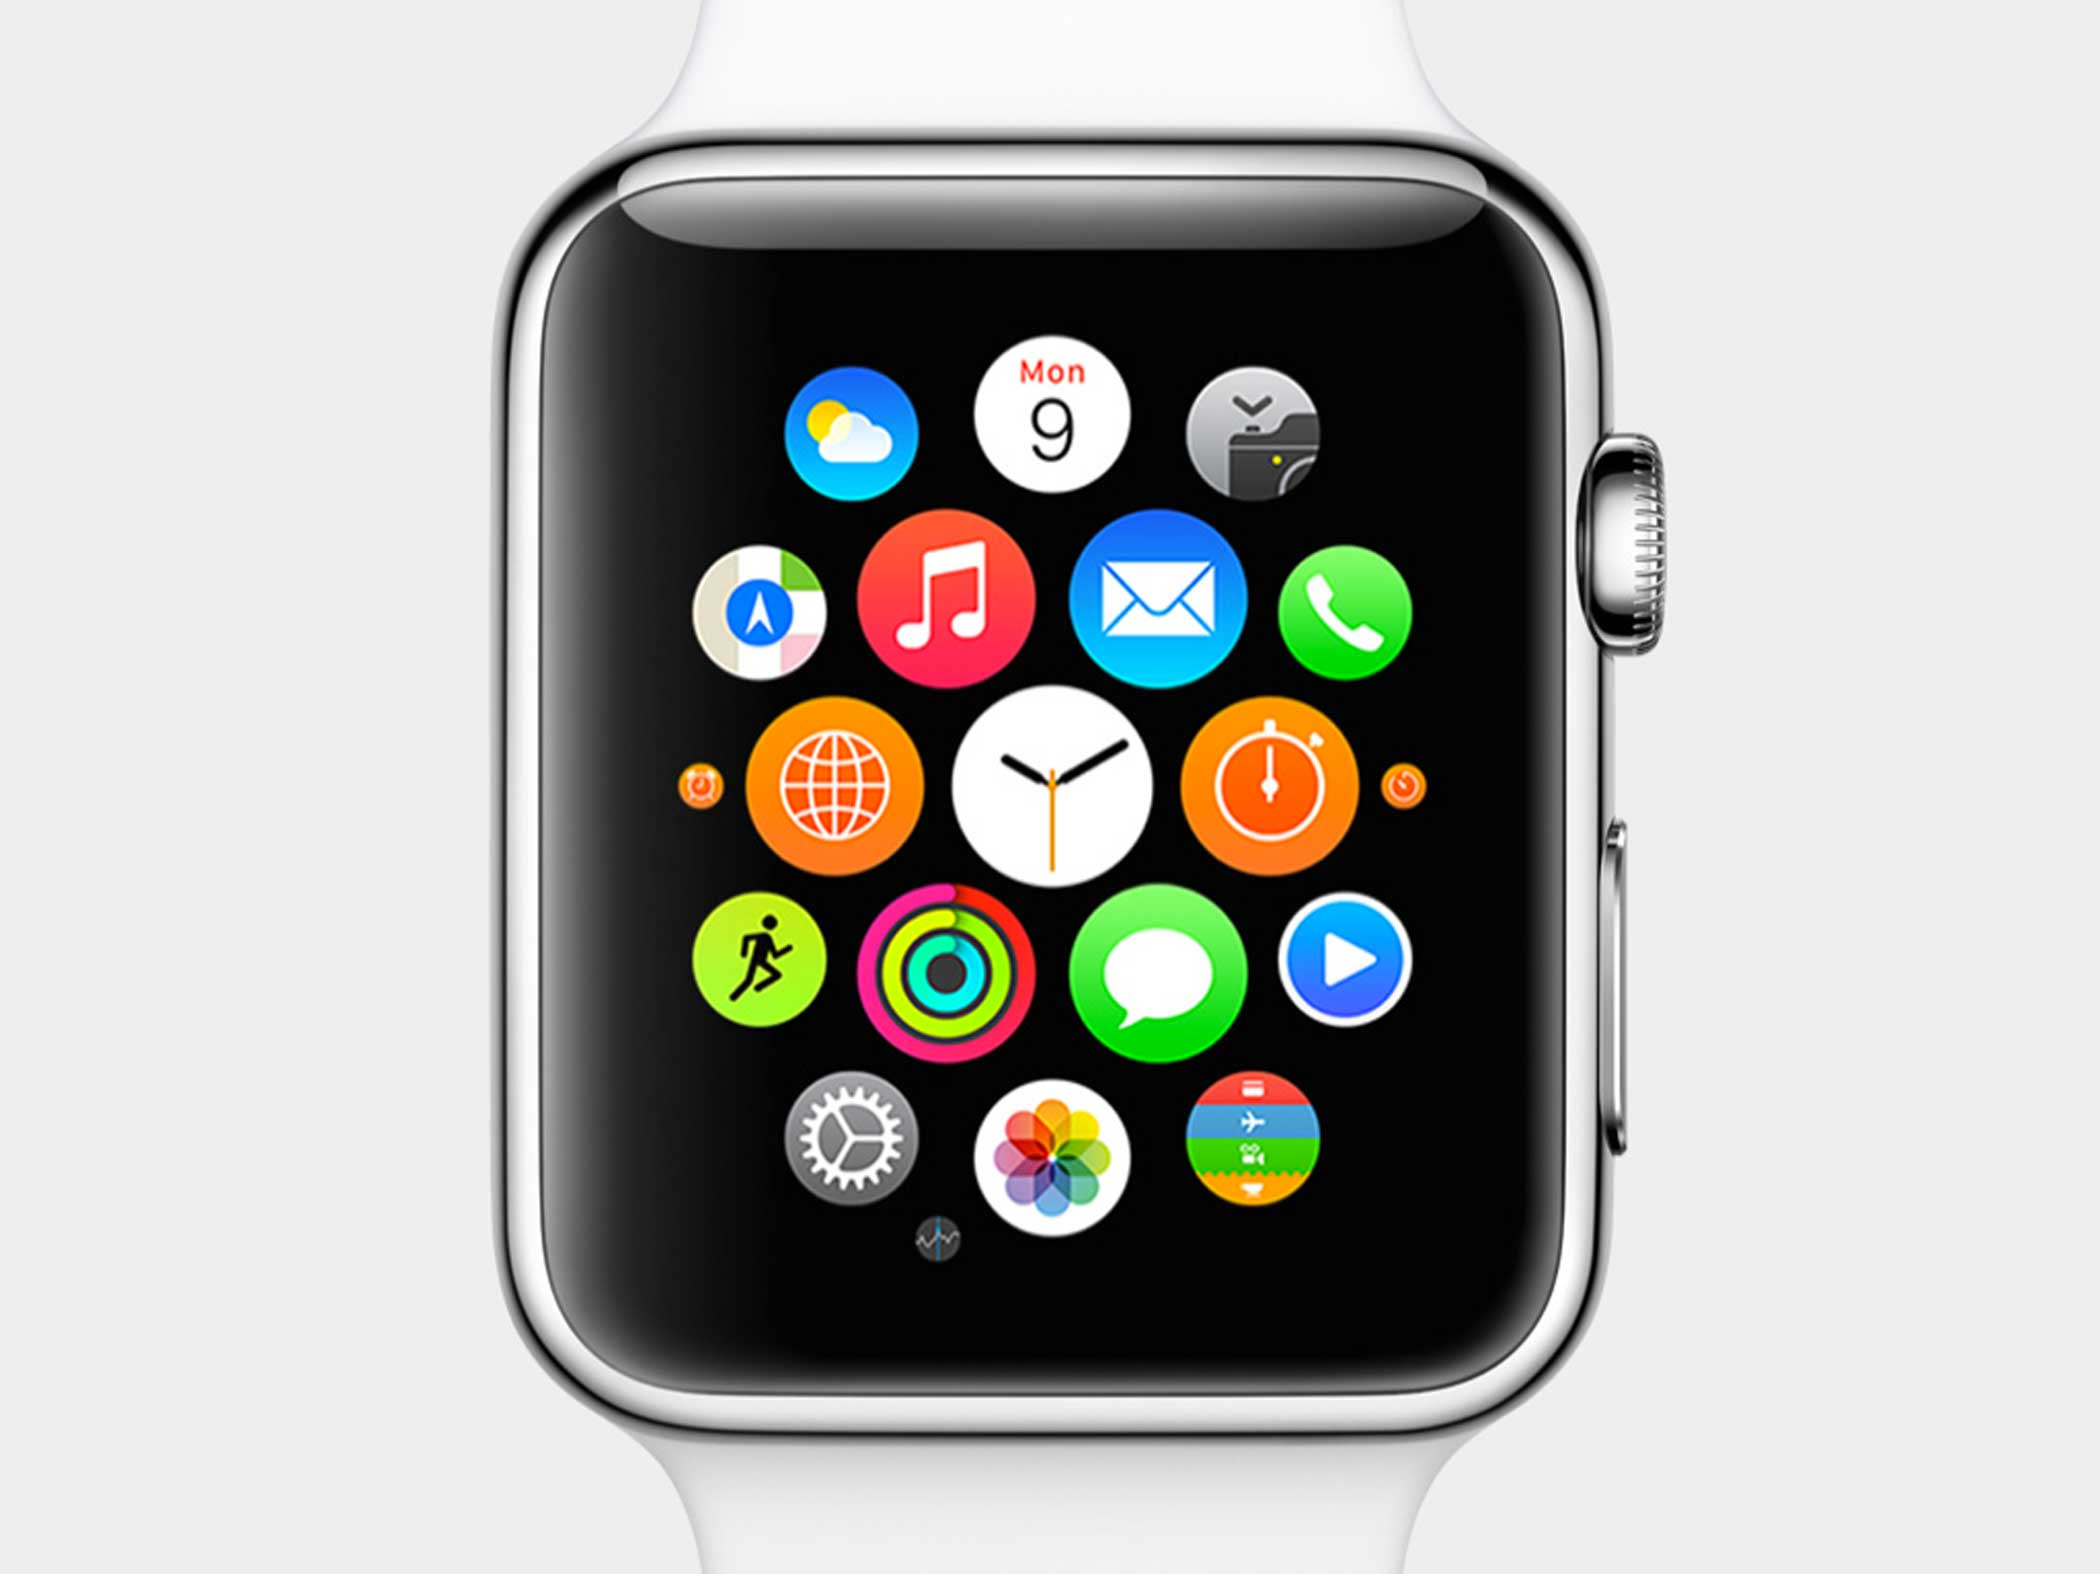 In addition to timekeeping, communications, and health and fitness, Apple Watch lets you do so much more.